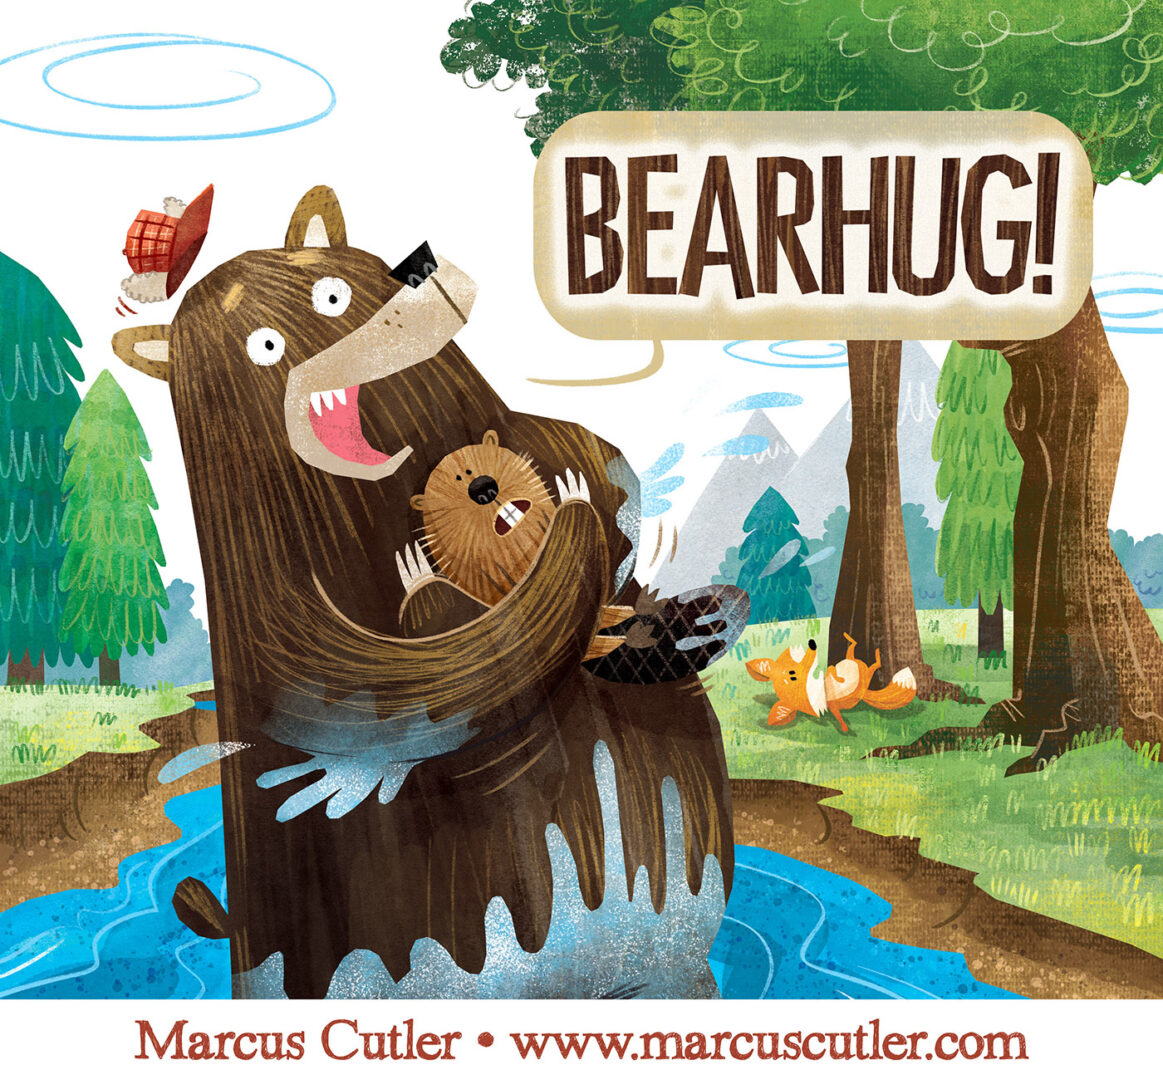 Bearhug! Personal work by artist @MarcusCutler 🐻 See more of their art at hireillo.com/marcus-cutler/ #Art #ChildrensIllustration #Publishing